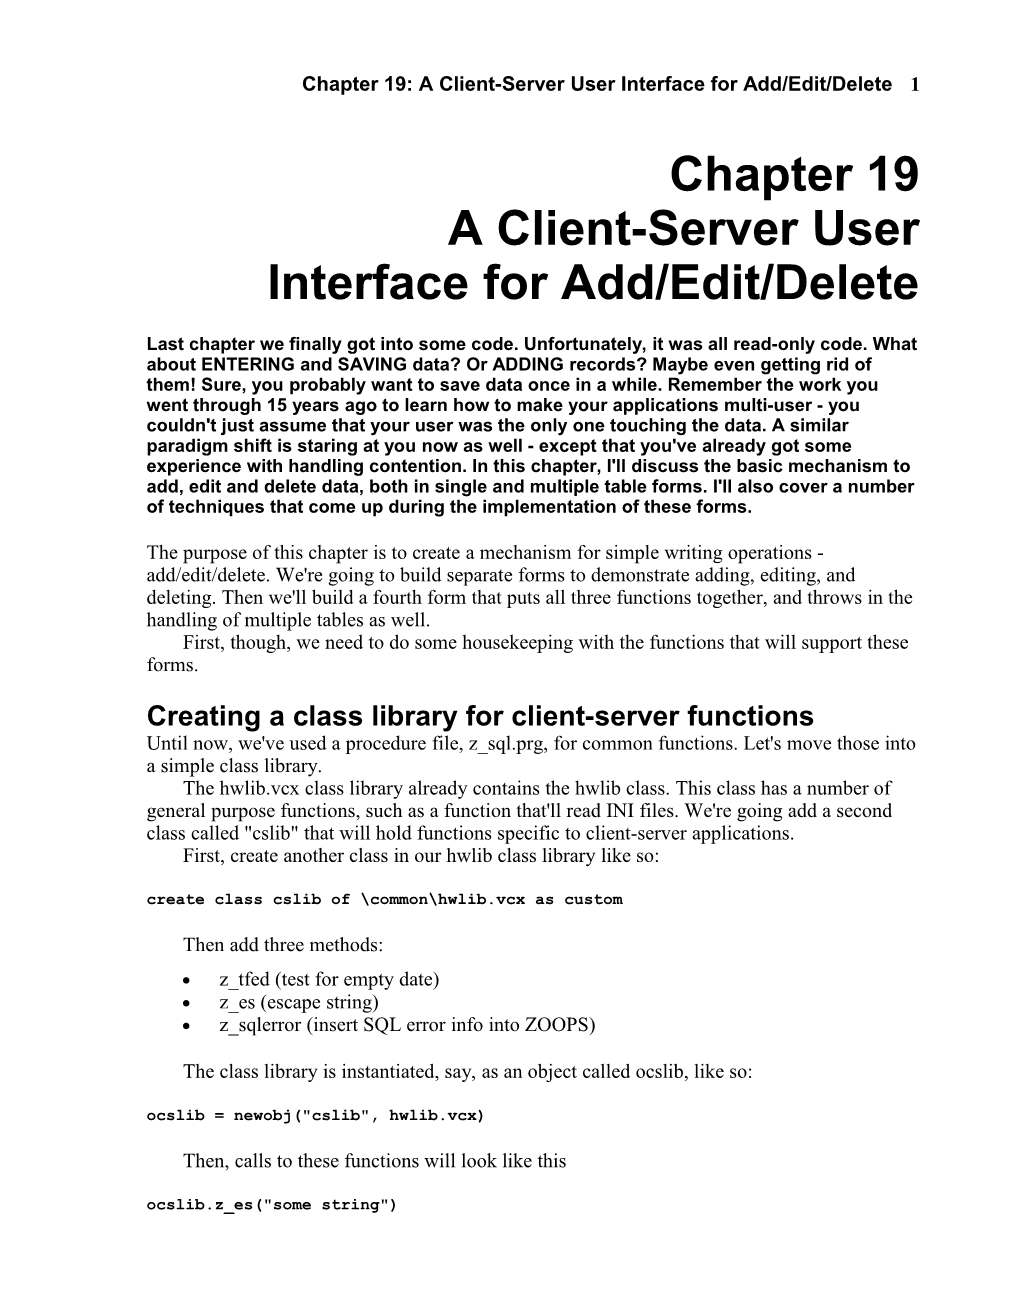 Chapter 19: a Client-Server User Interface for Add/Edit/Delete 1